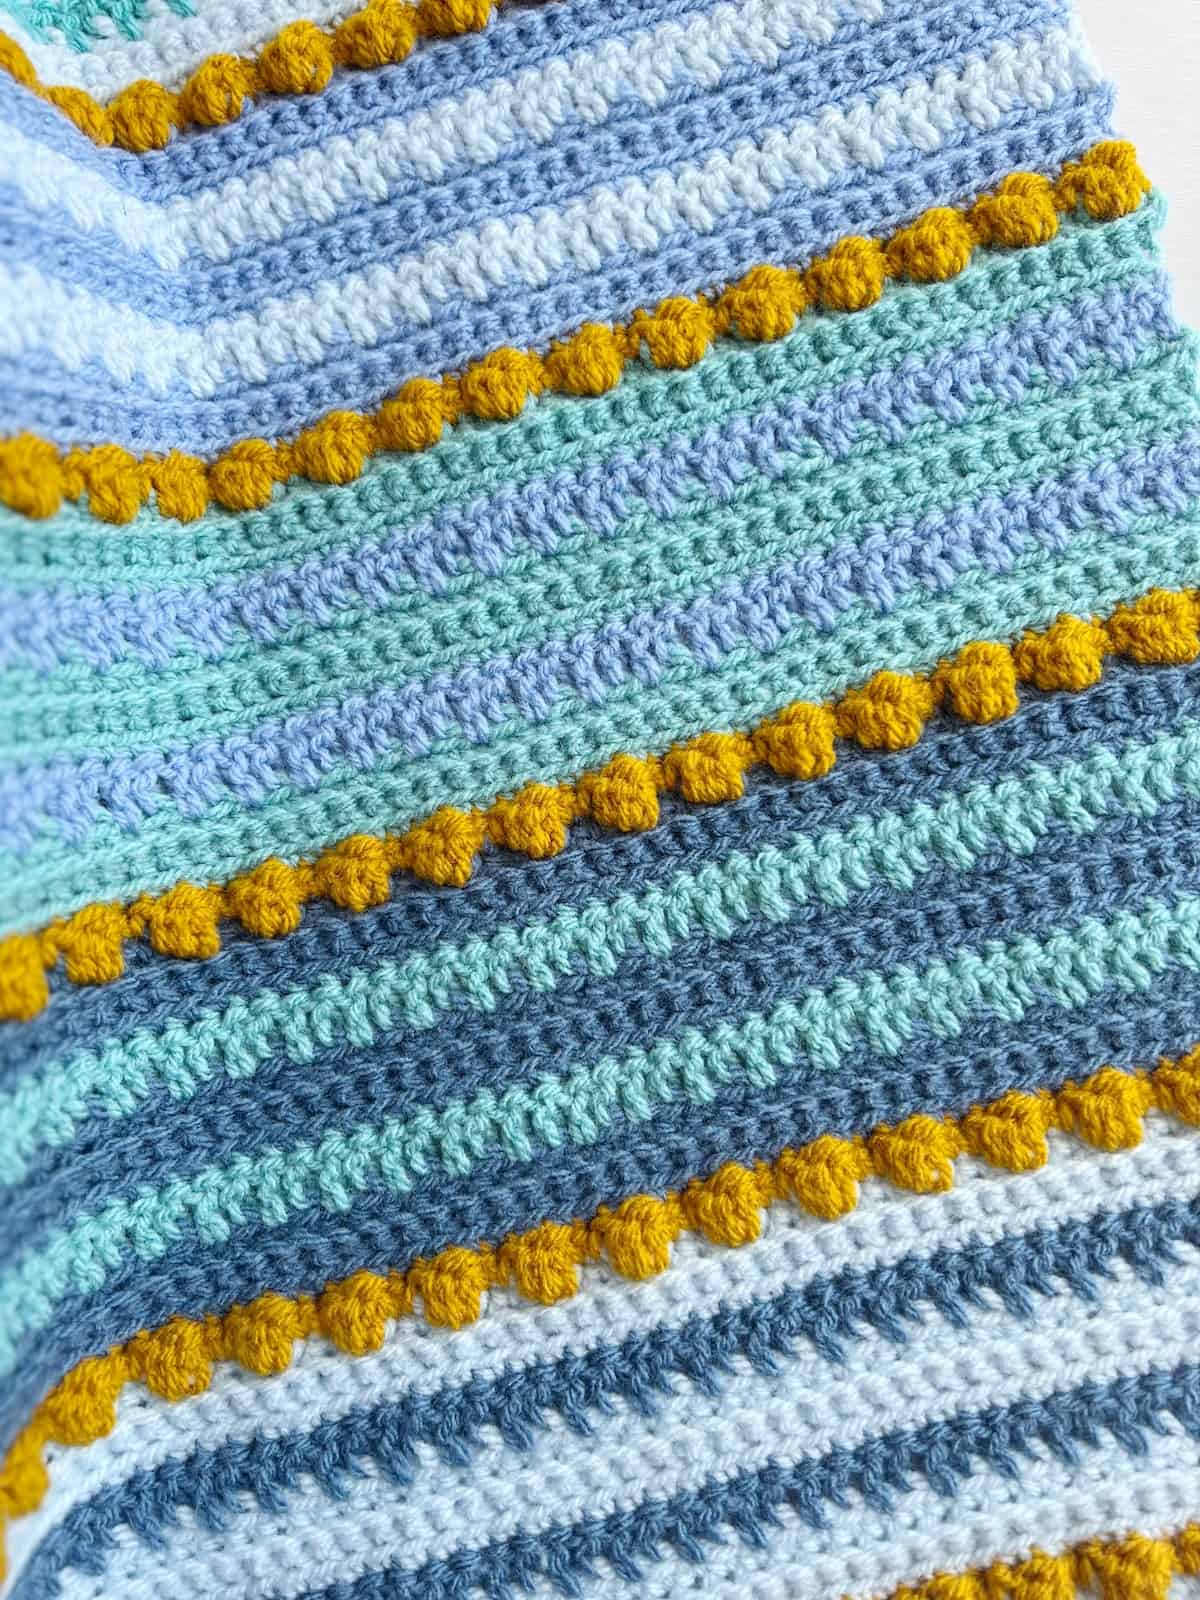 Crochet blanket with bobbles and bright modern colours.